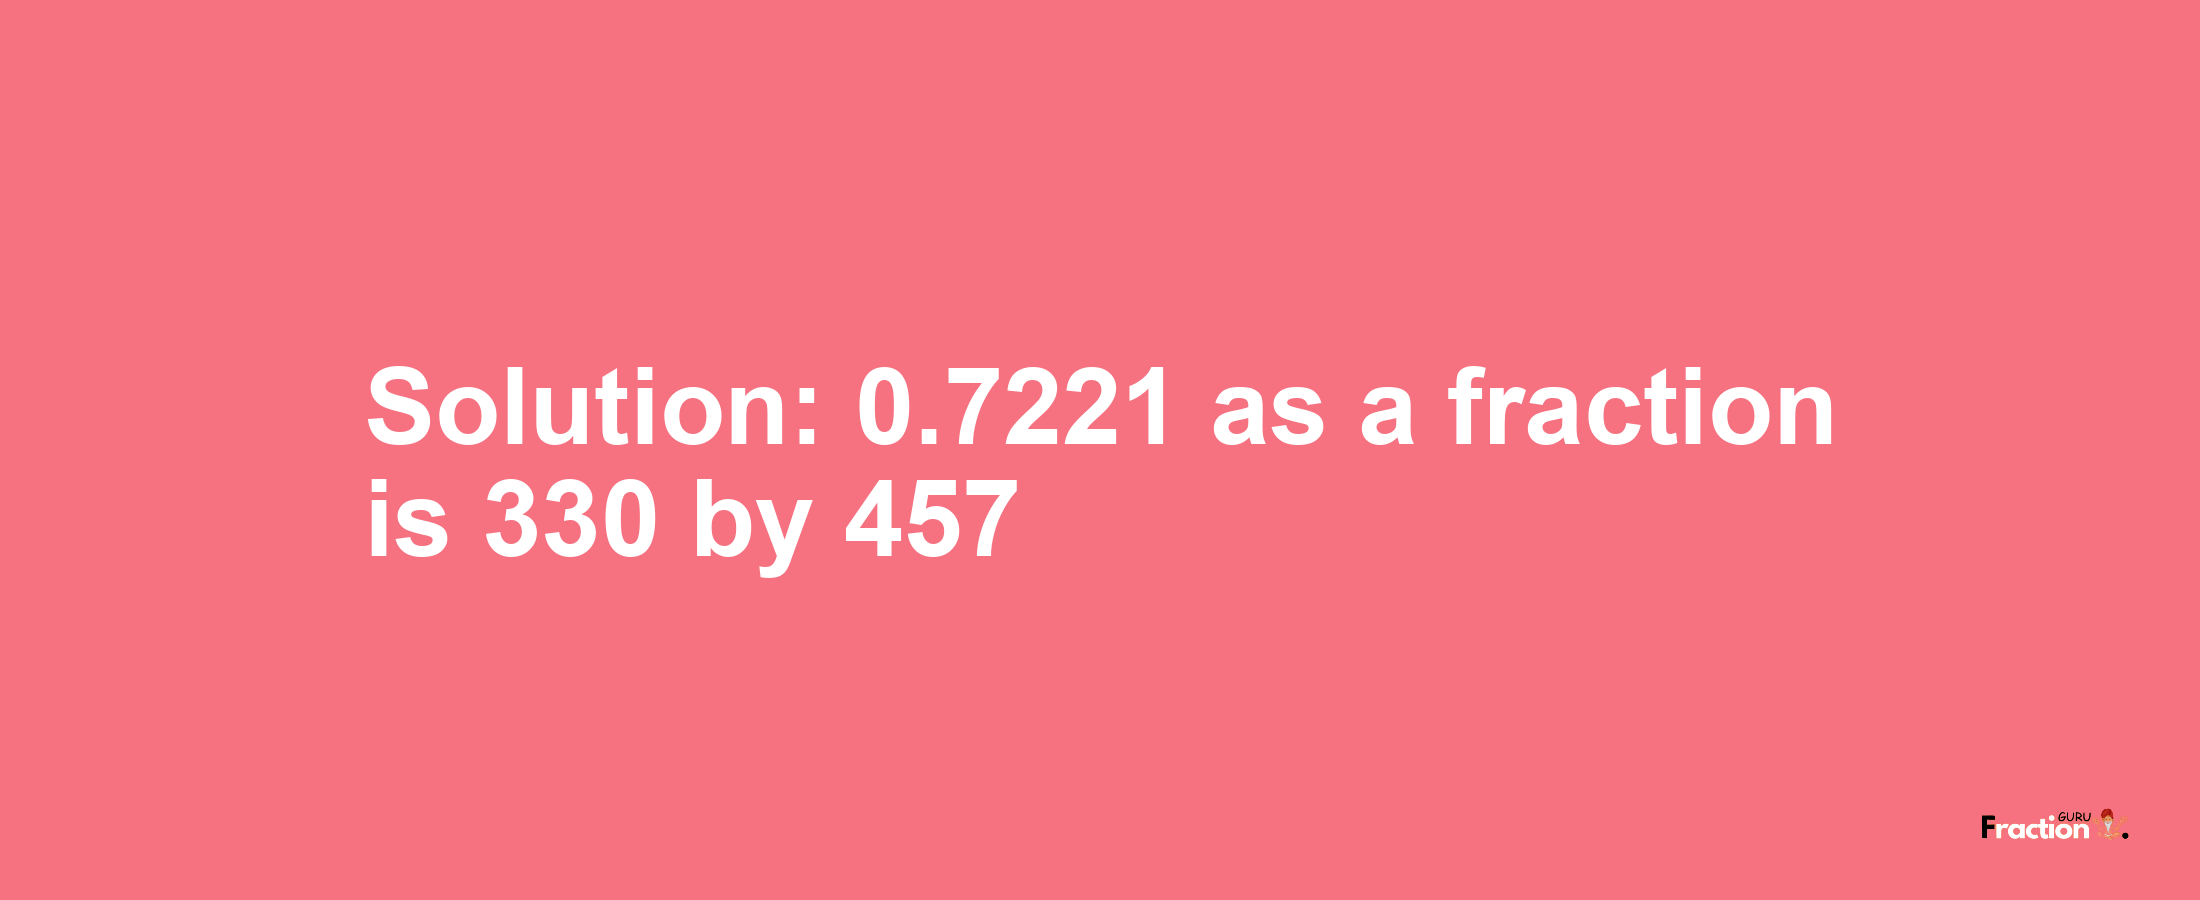 Solution:0.7221 as a fraction is 330/457